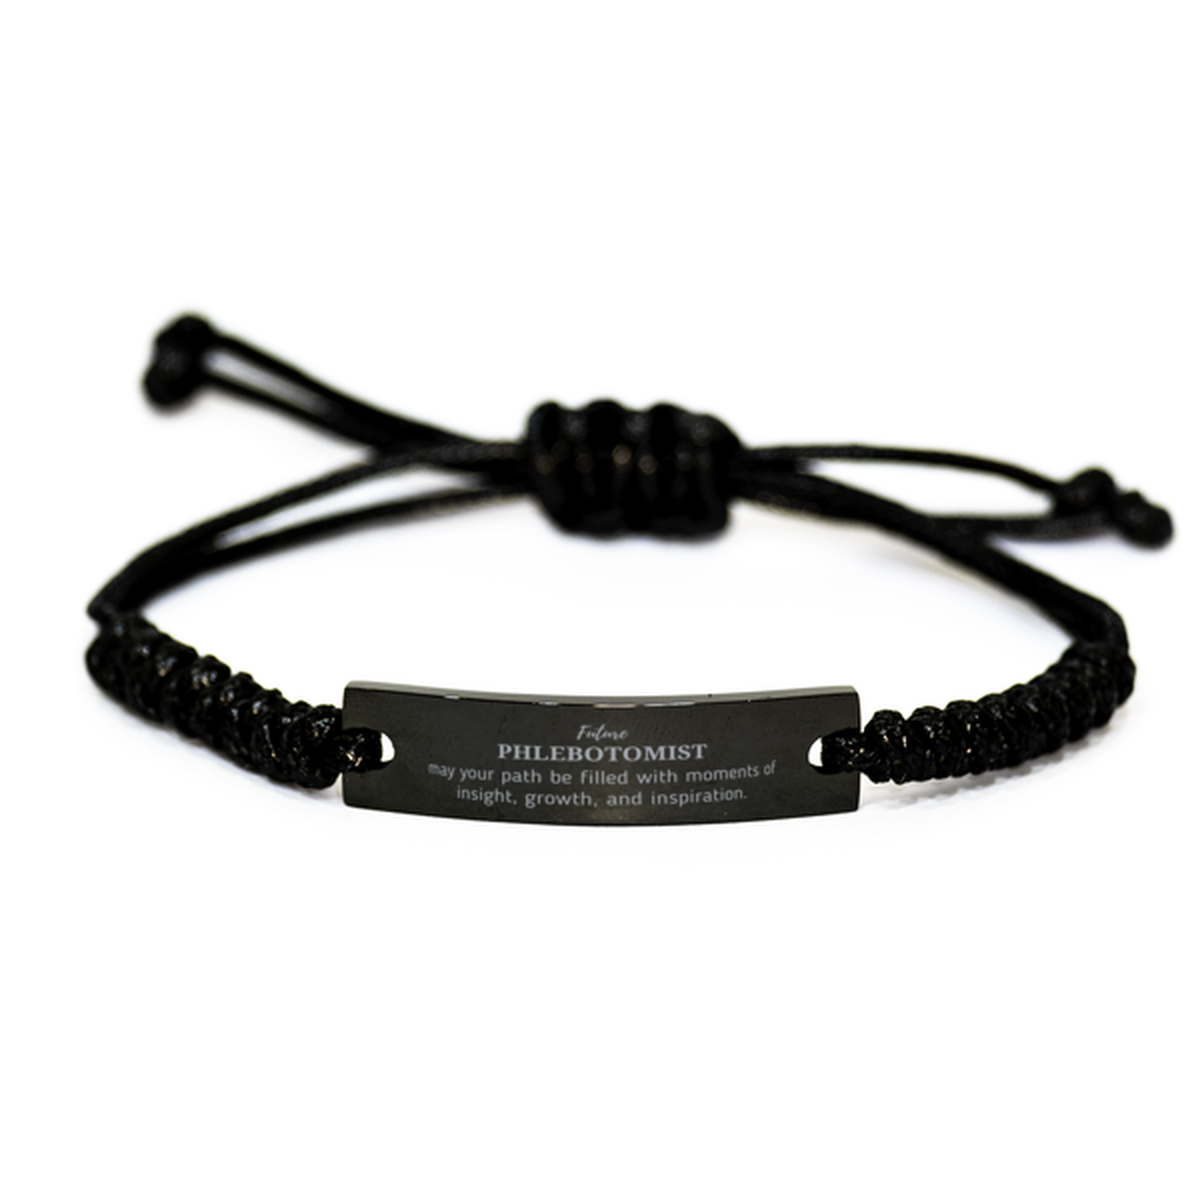 Future Phlebotomist Gifts, May your path be filled with moments of insight, Graduation Gifts for New Phlebotomist, Christmas Unique Black Rope Bracelet For Men, Women, Friends